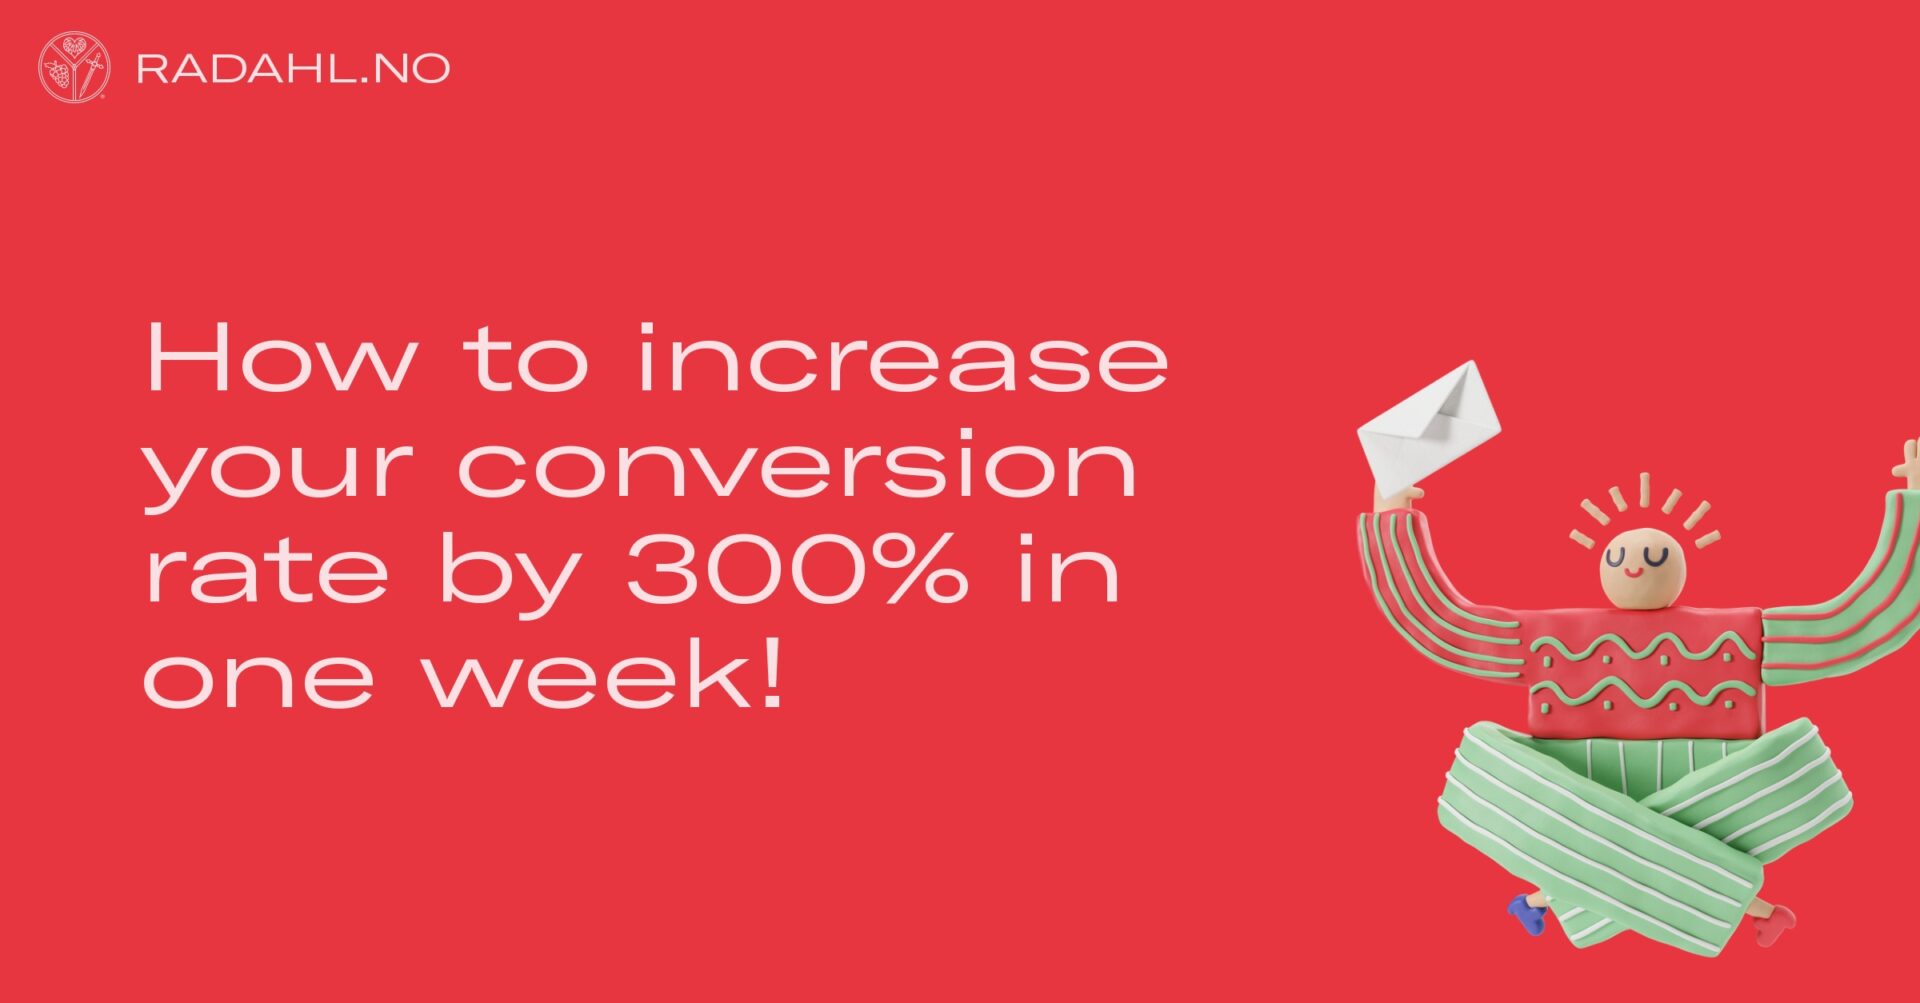 How to increase your conversion rate by 300% in one week!